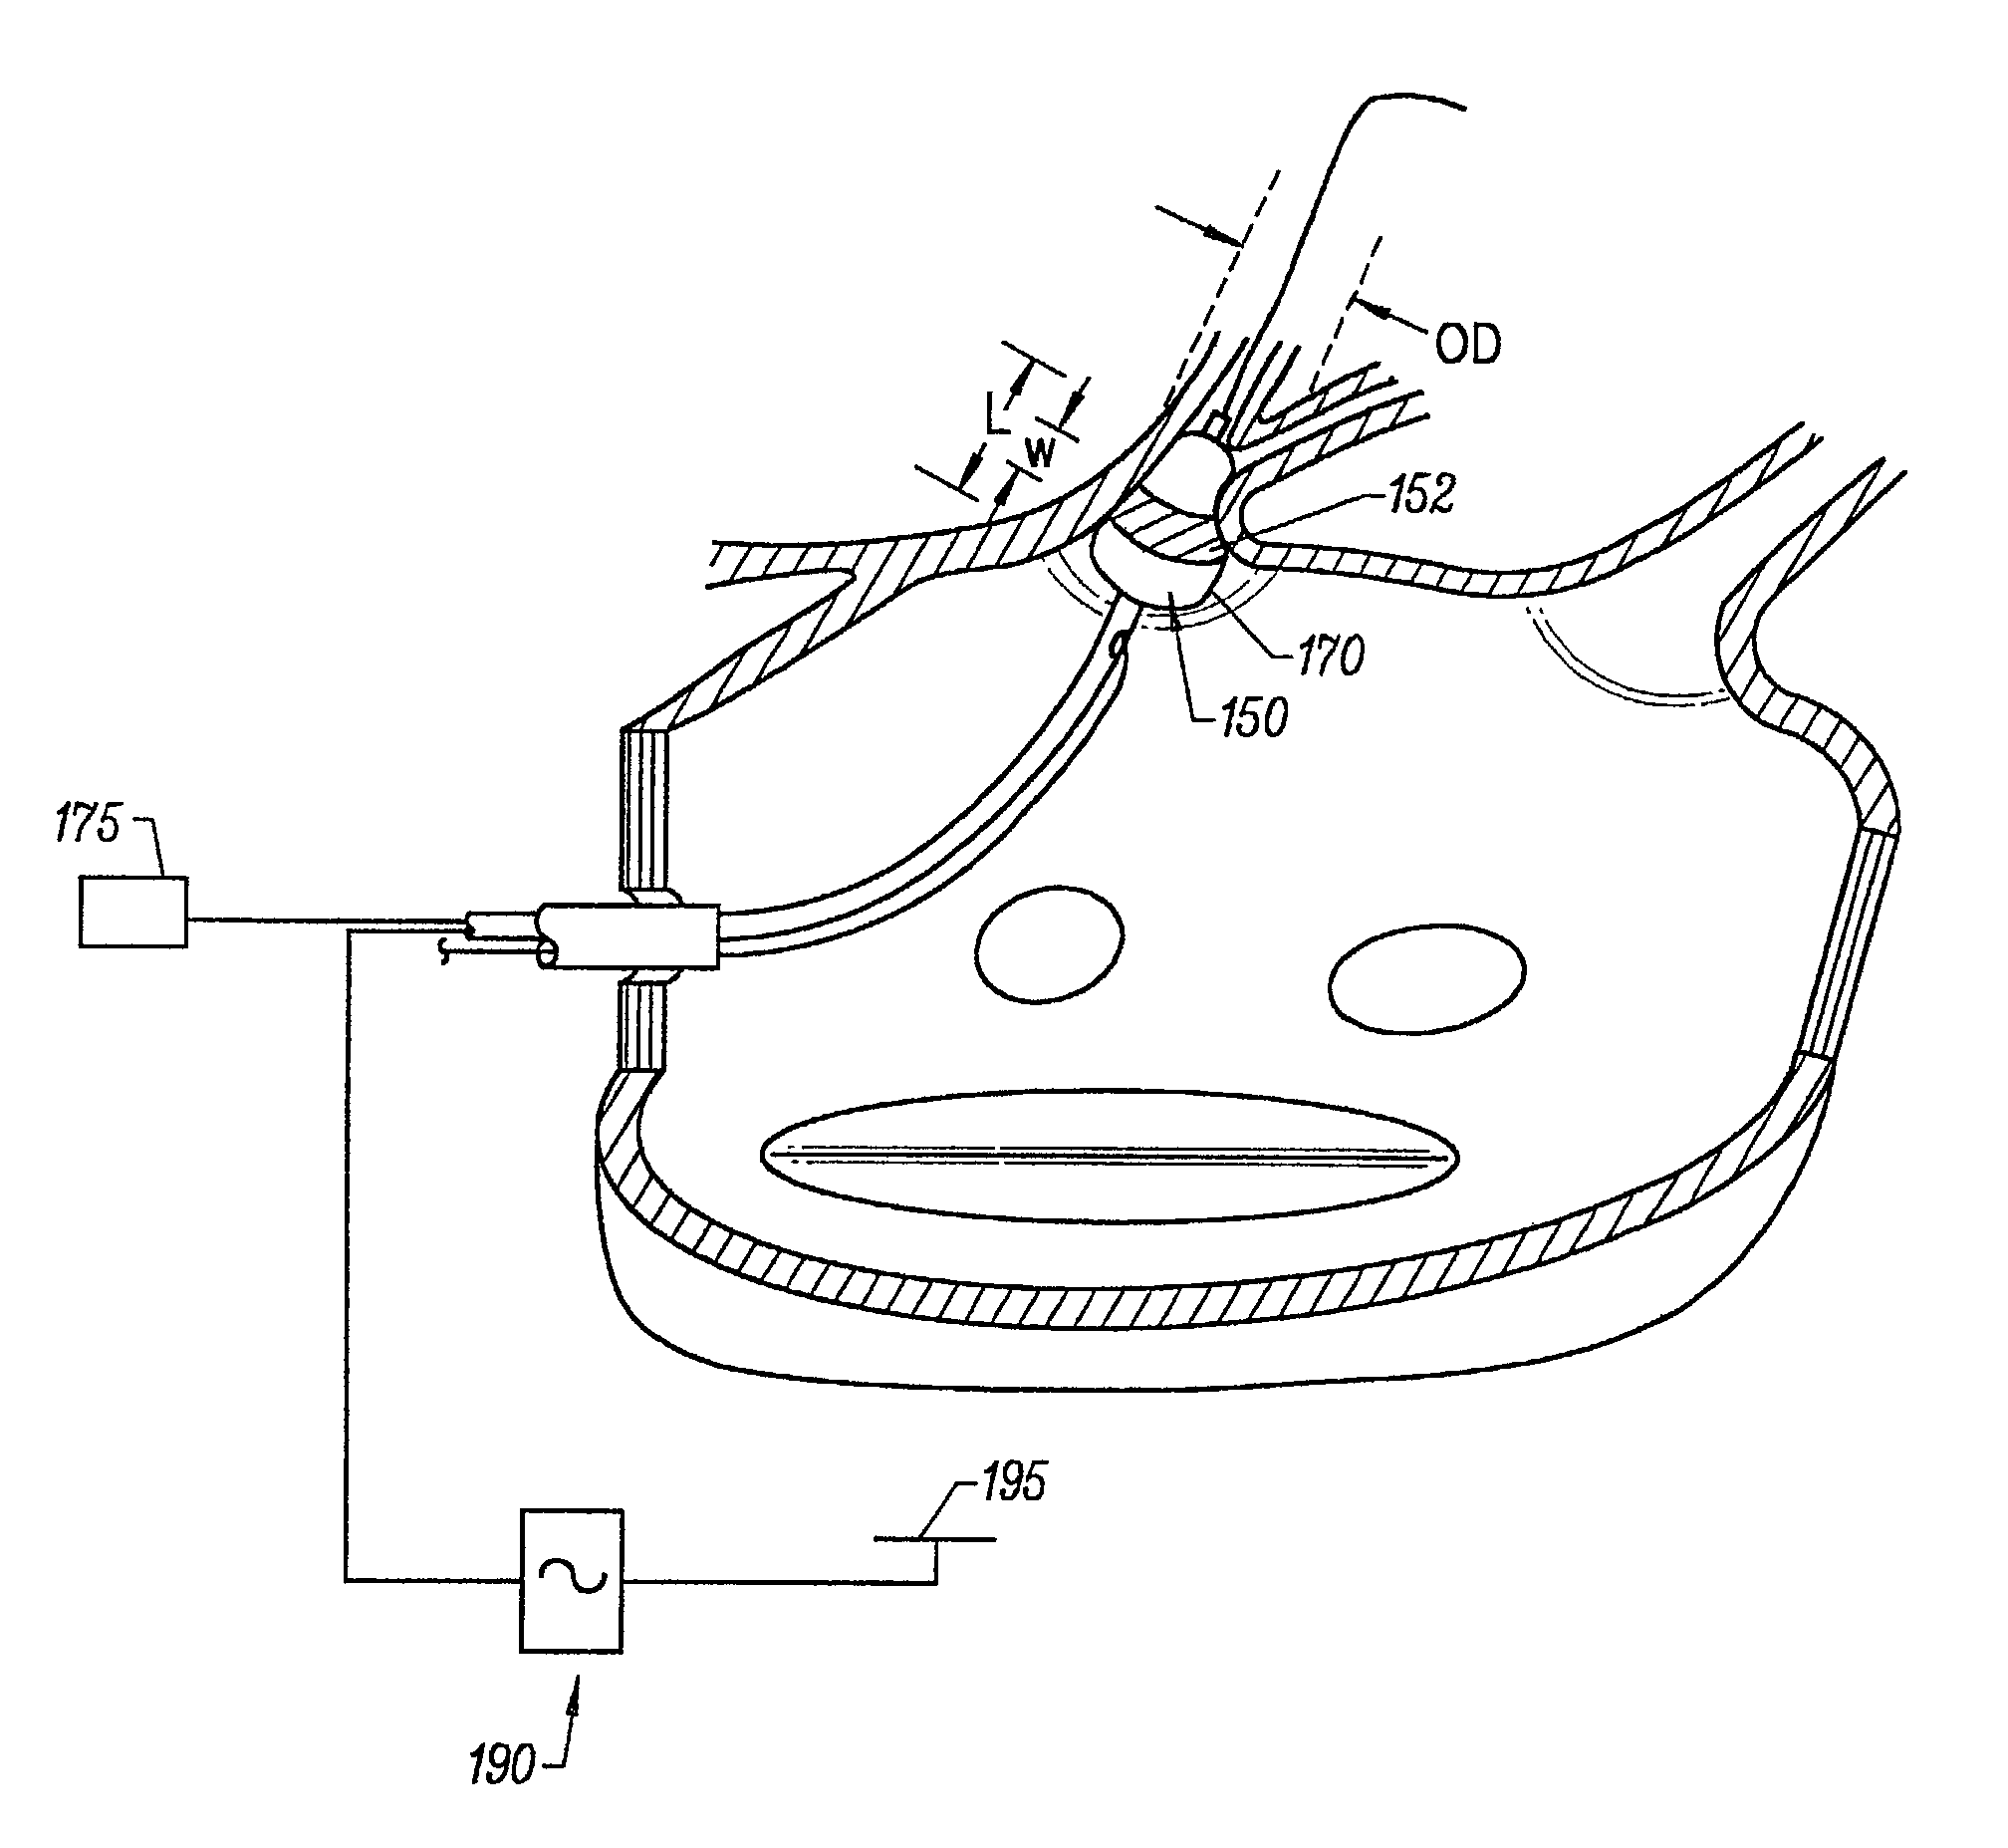 Device and method for forming a circumferential conduction block in a pulmonary vein